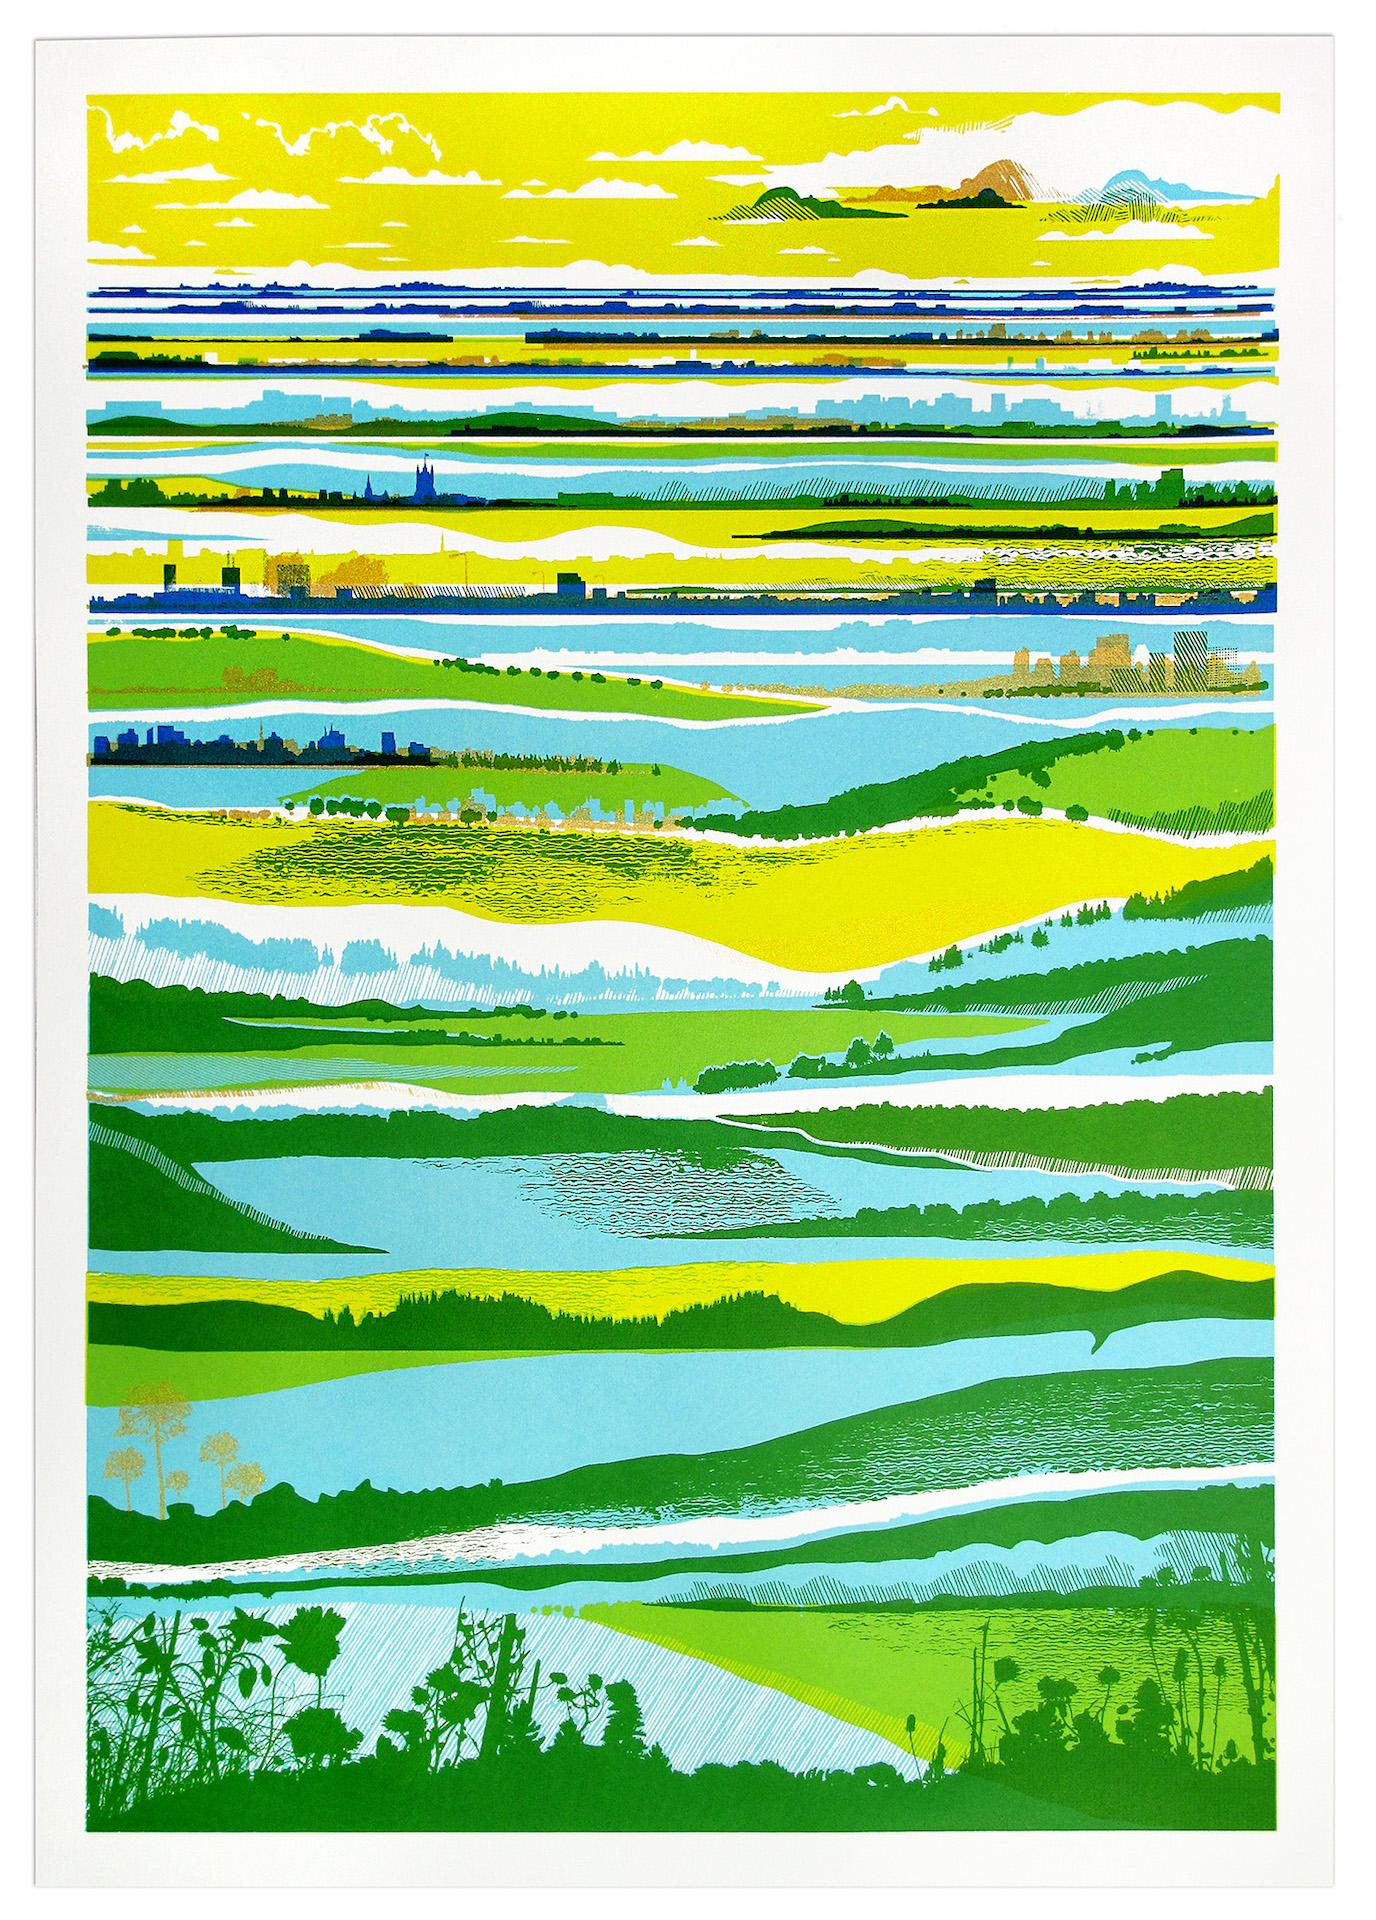 Chris Keegan
Town and Country
Limited Edition Silkscreen Print
Edition of 40
Sheet Size: H 56cm x W 40cm x D 0.1cm
Sold Unframed
Please note that in situ images are purely an indication of how a piece may look.

Town and Country is a limited edition